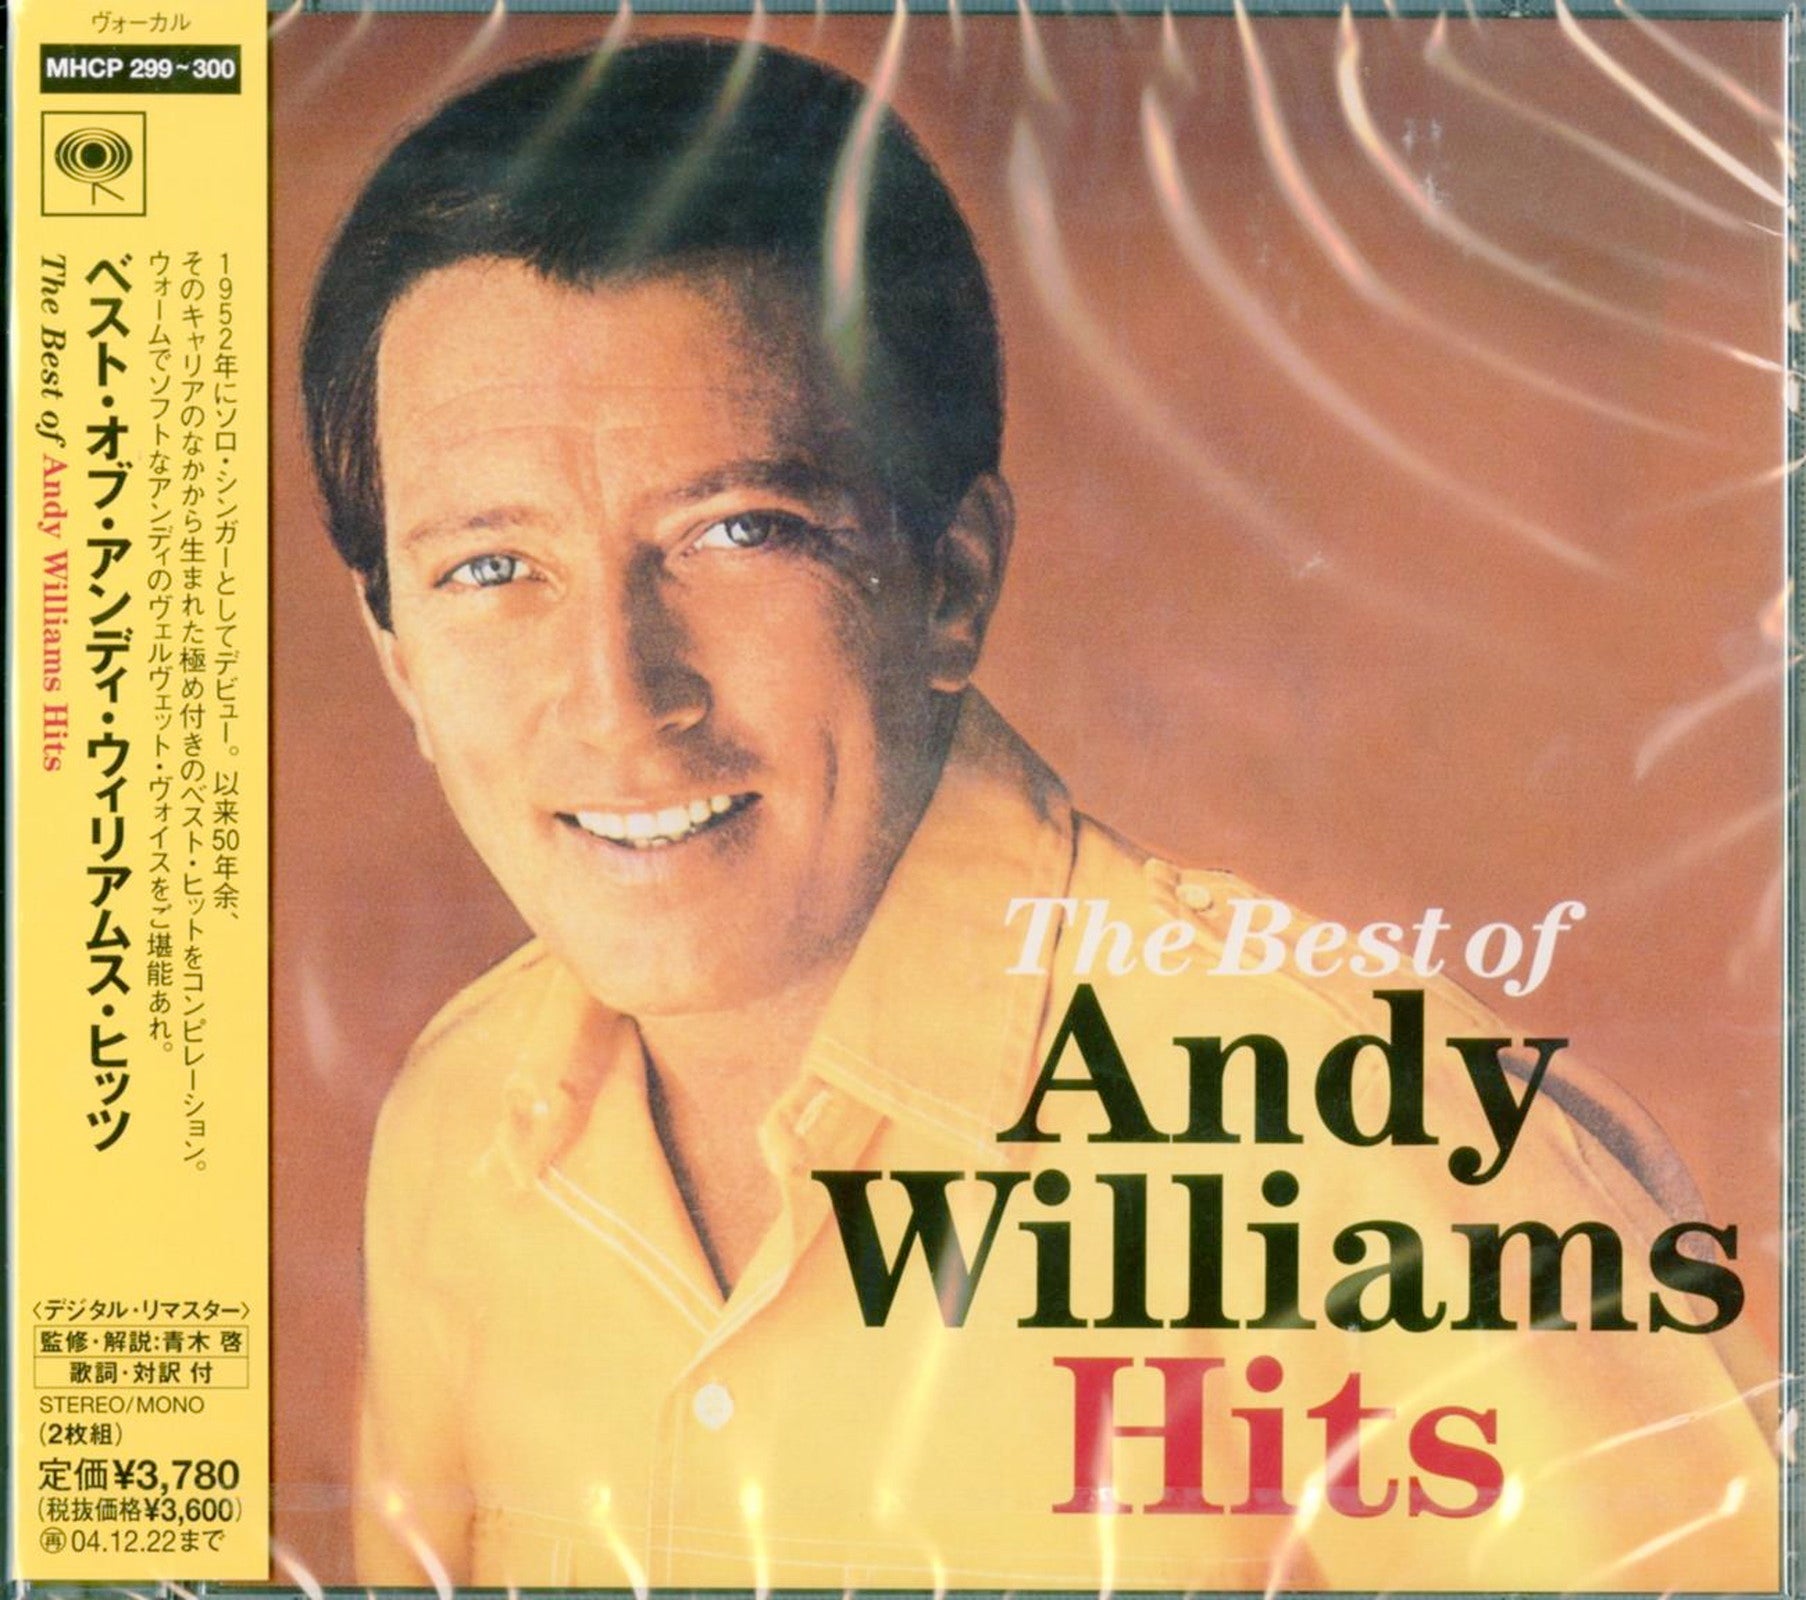 Andy Williams - The Best Of Andy Williams Hits - Japan 2 CD – CDs